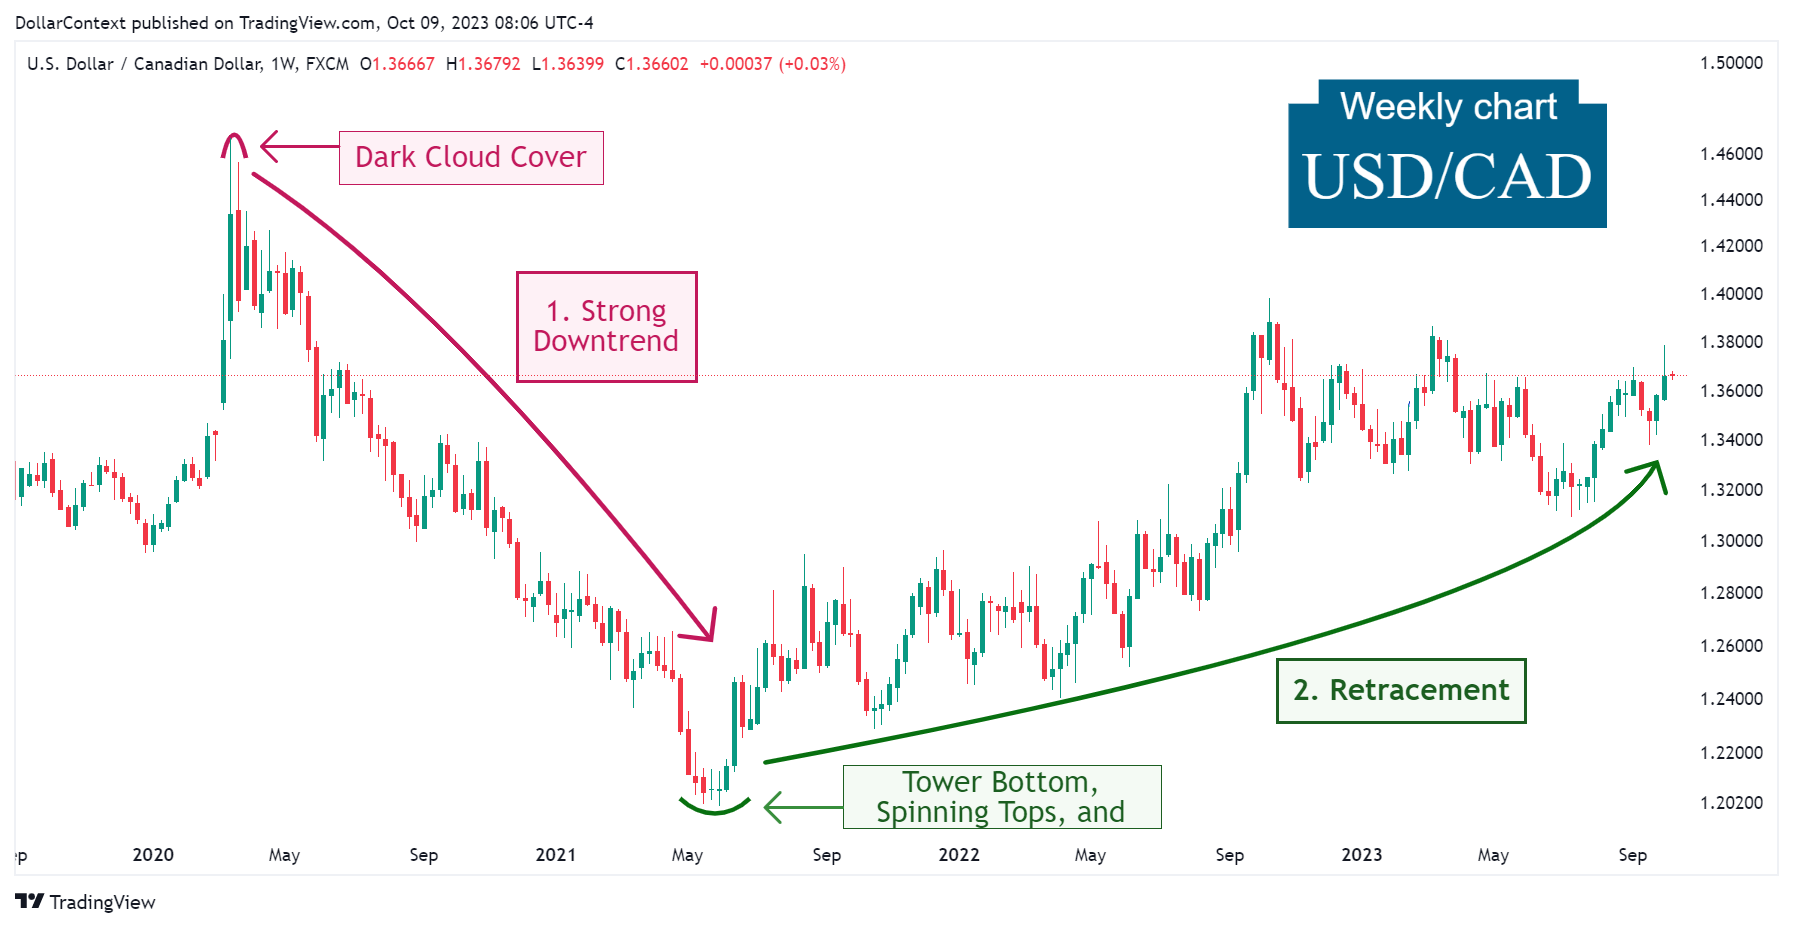 USD/CAD: The Bottom in Early 2021 and the Subsequent Ascent (Weekly Chart)